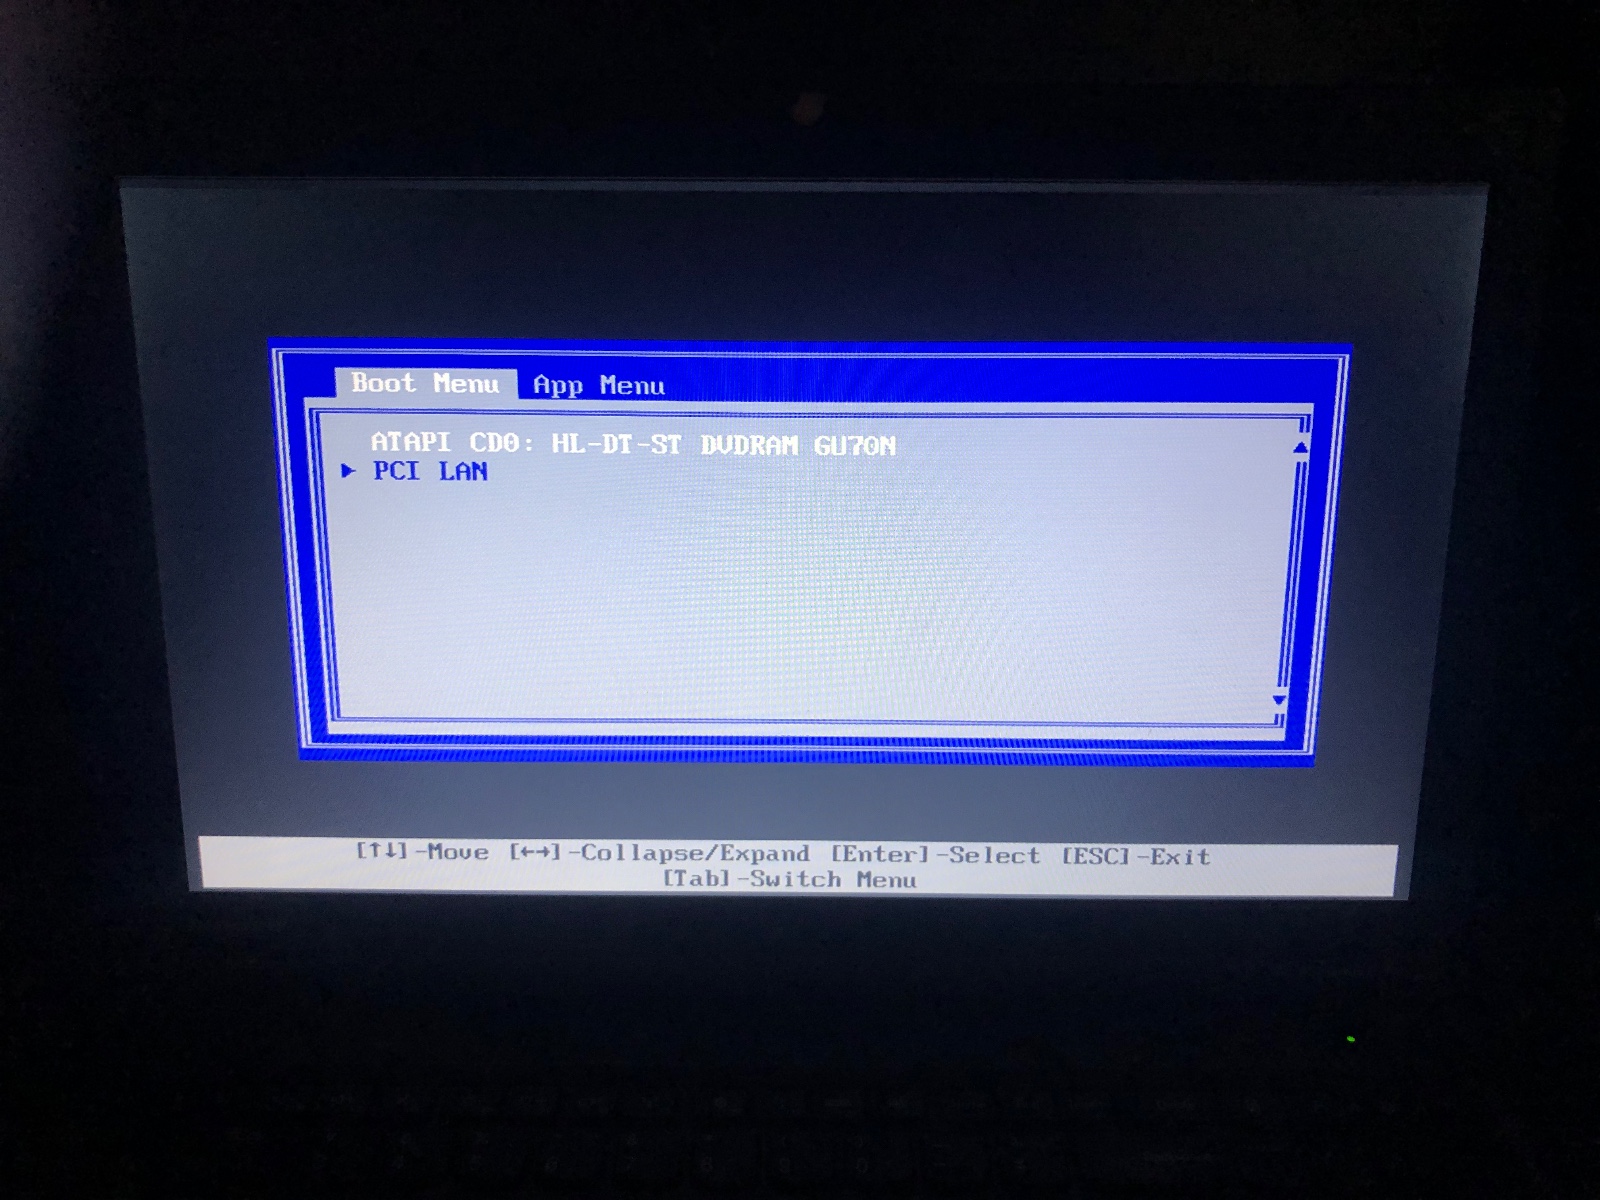 HELP-I-am-stuck-in-boot-menu-and-it-won-t-let-me-pick-a-drive-to-boot-from  - English Community - LENOVO COMUNIDAD